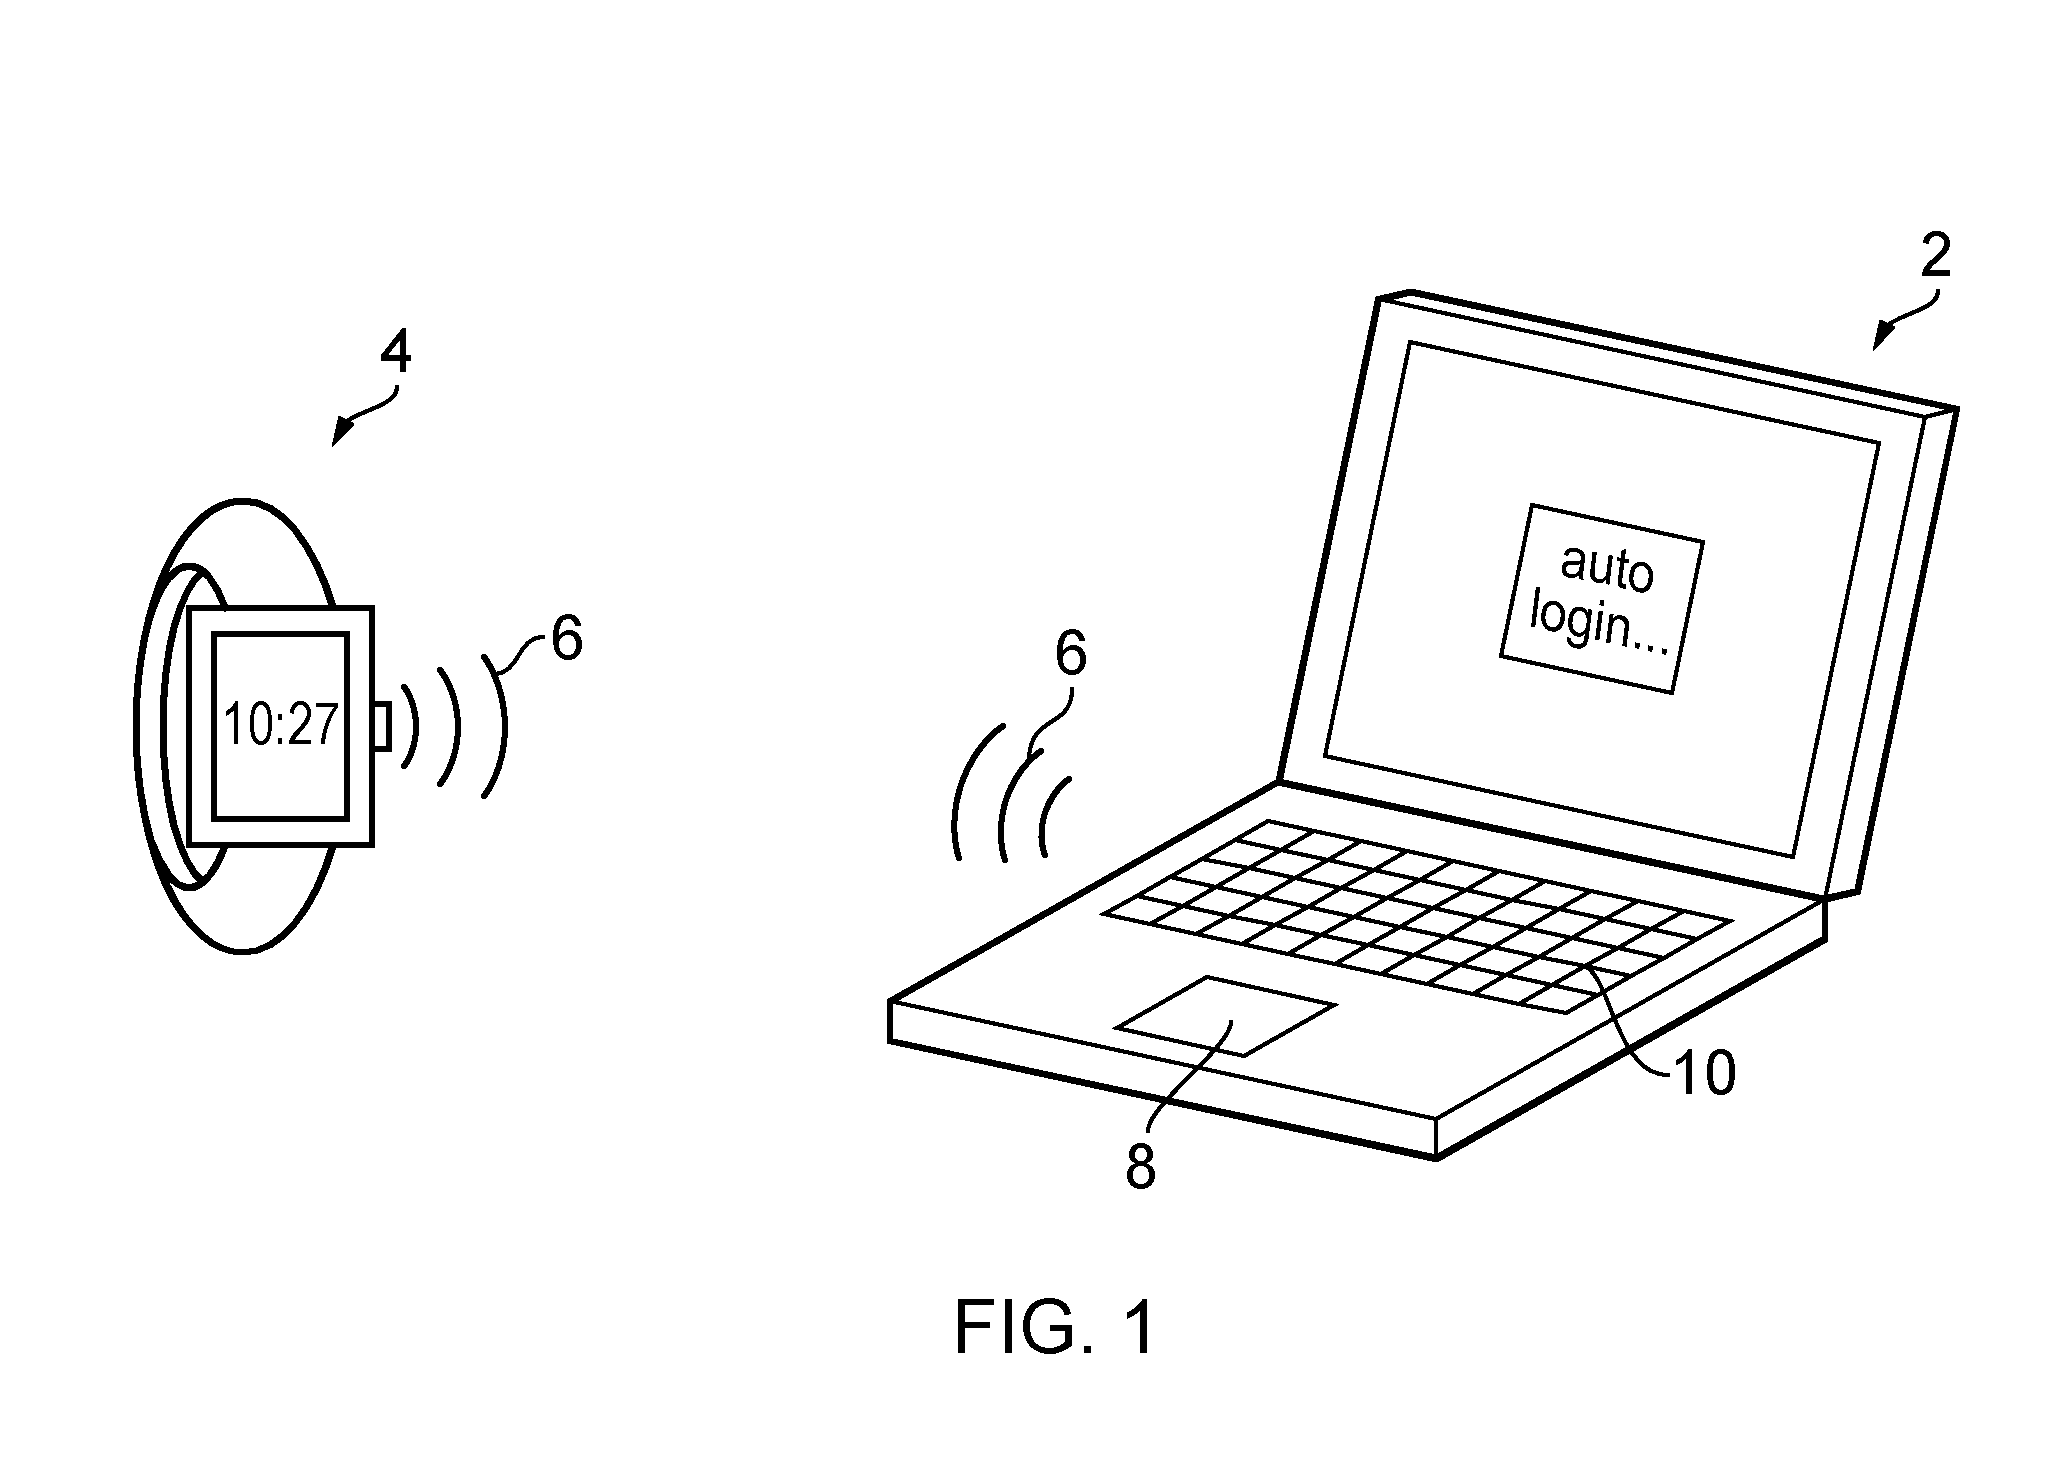 Calibrating proximity detection for a wearable processing device